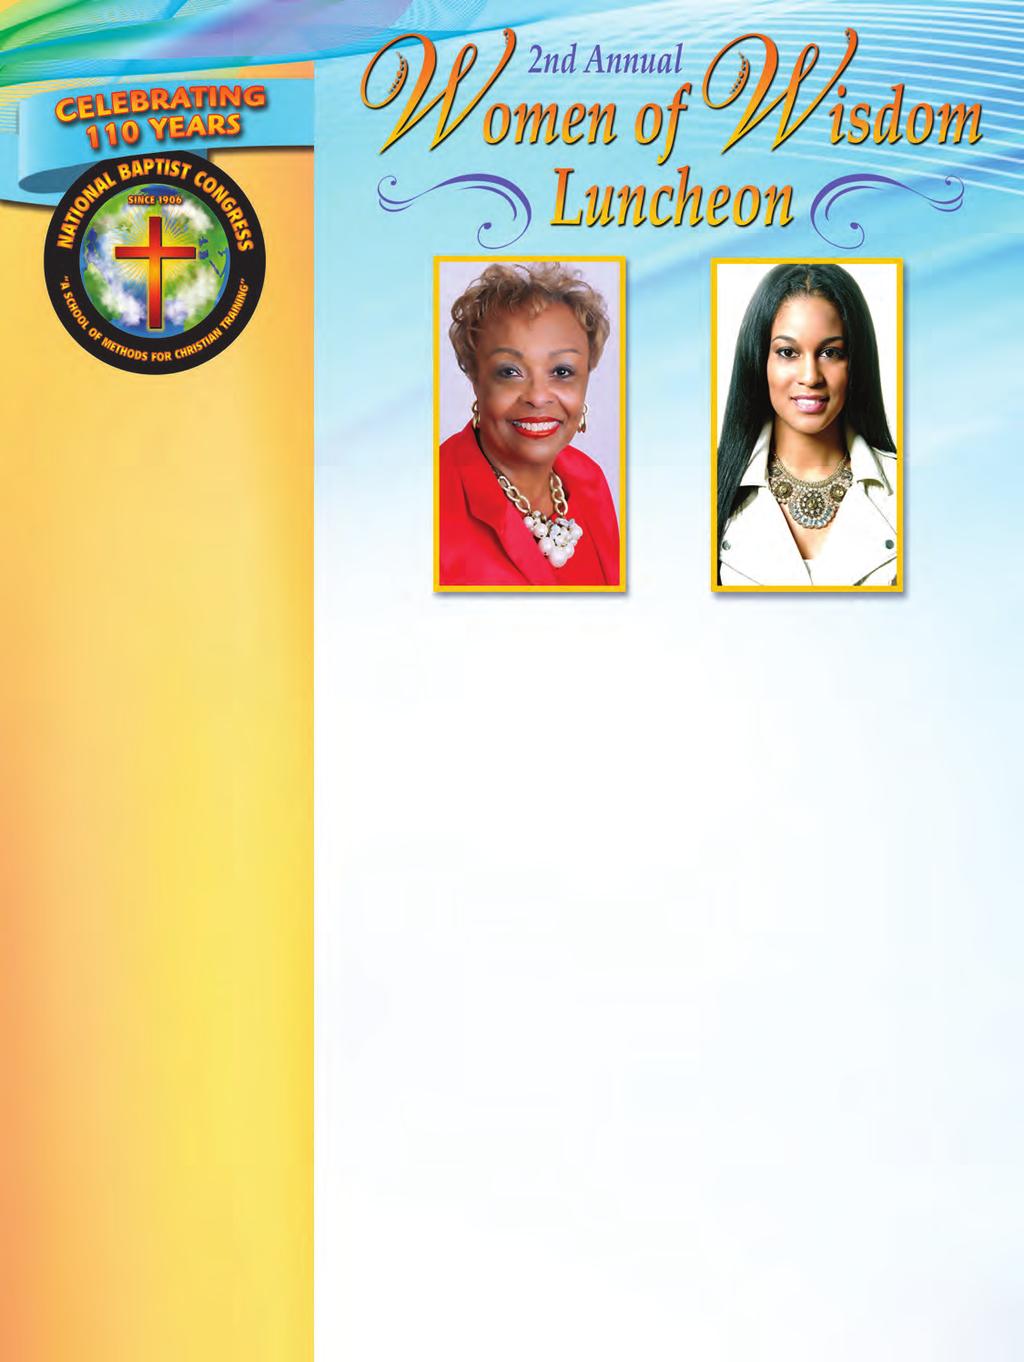 Scriptural Reference: Matthew 9:21 22 Theme: Healed Through Faith Speaker Dr. Sheila M. Bailey, Author and President of Sheila M. Bailey Ministries Dr. Sheila M. Bailey LaDonna Boyd Hosted by LaDonna Boyd, Chief Operating Officer of the R.